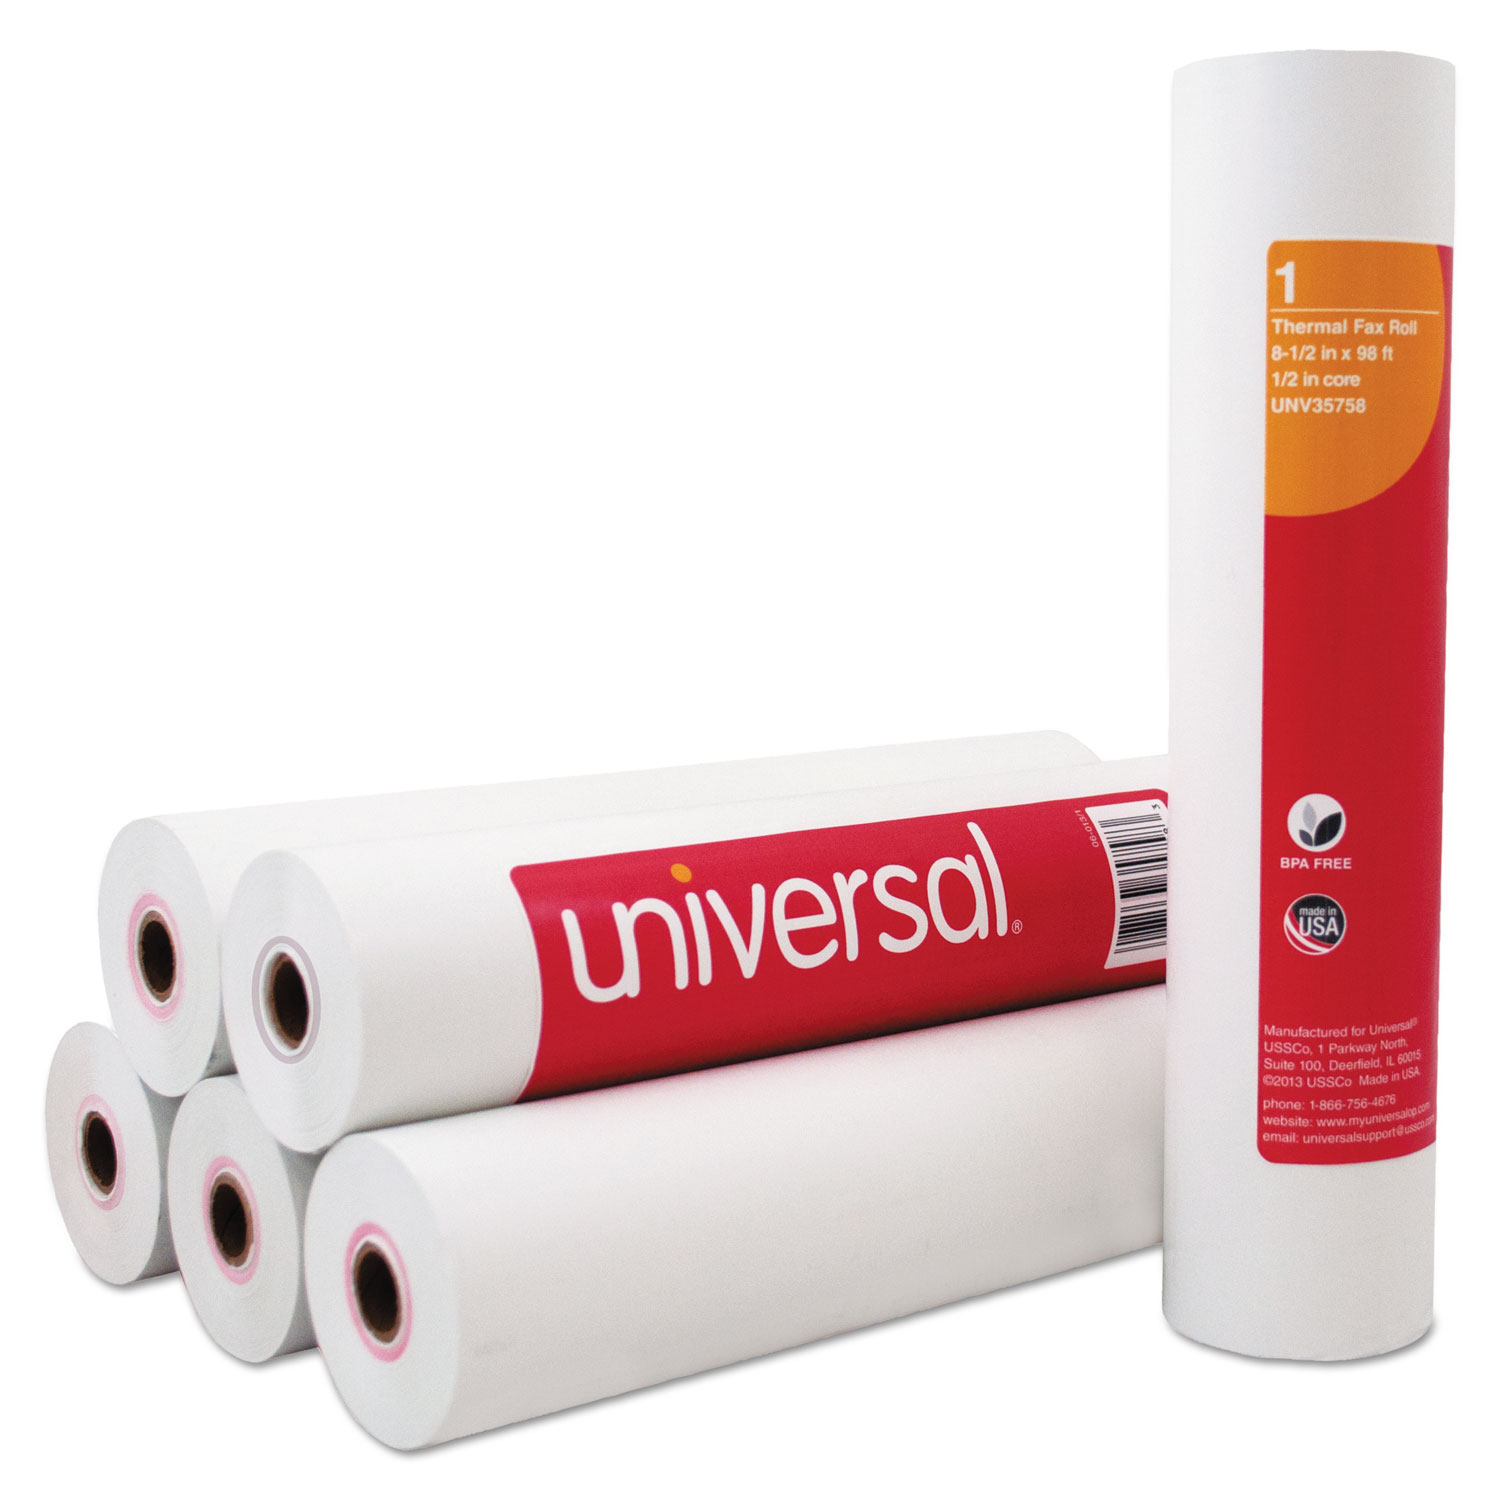  Universal UNV35758 Direct Thermal Printing Fax Paper Rolls, 0.5 Core, 8.5 x 98ft, White, 6/Pack (UNV35758) 